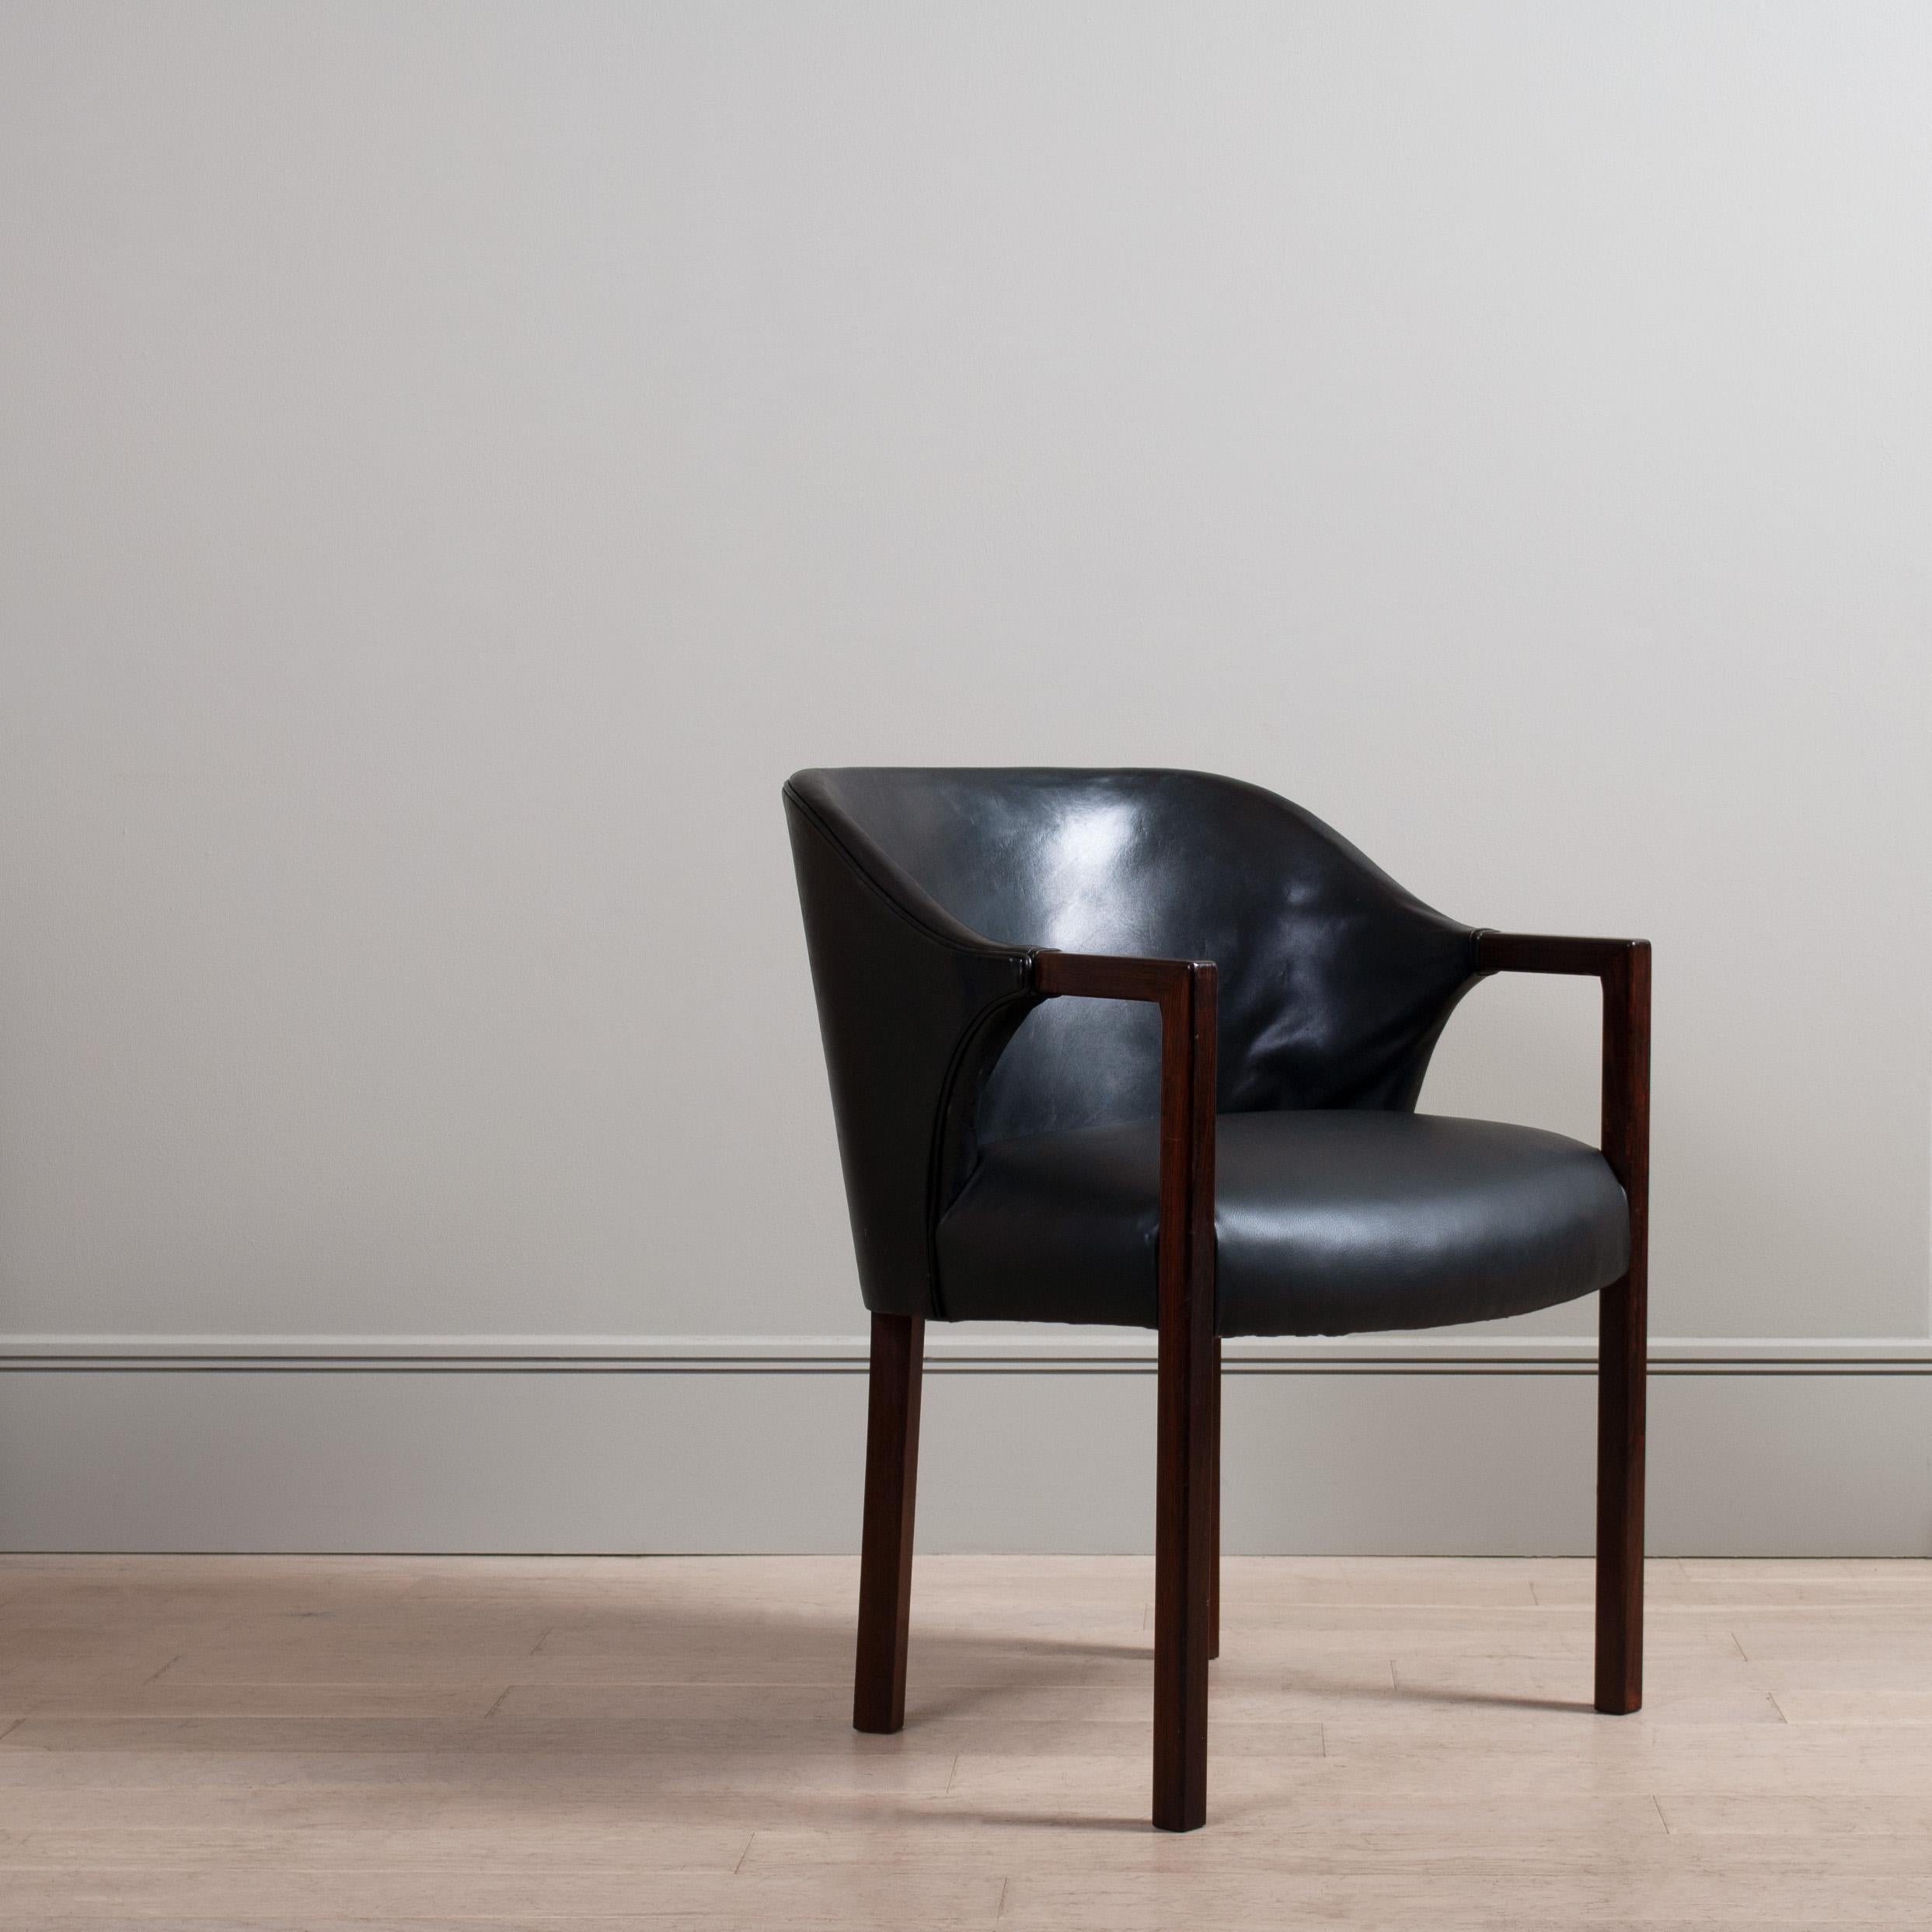 20th Century Black Leather Armchair, Jacob Kjaer attributed